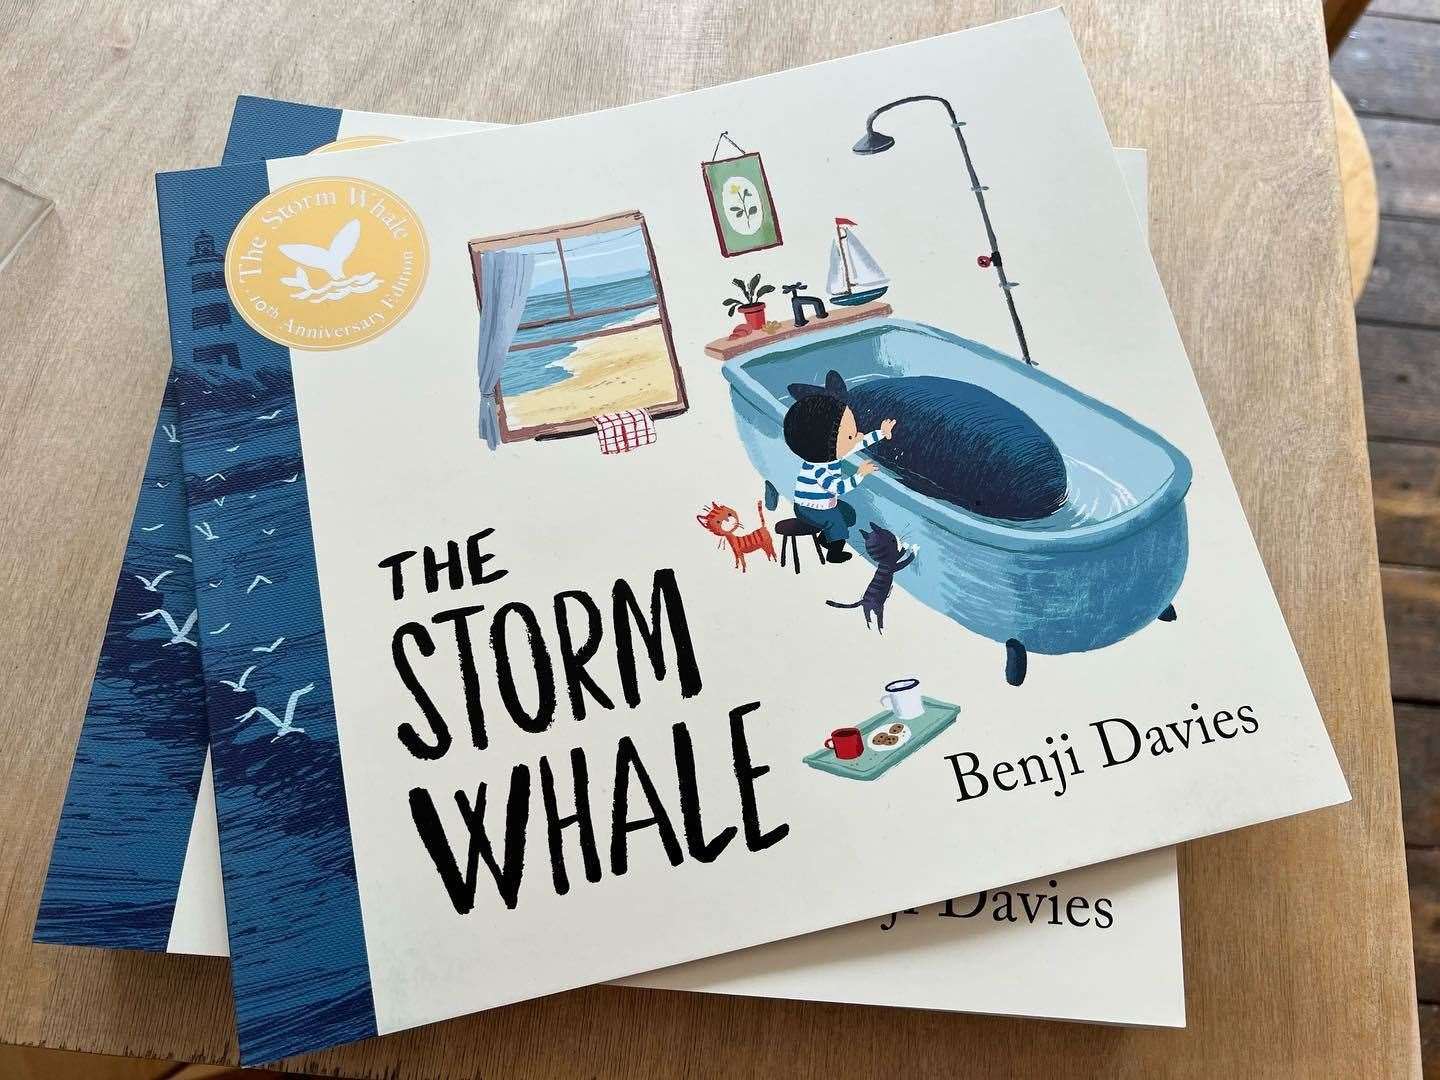 The Storm Whale has now been translated into more than 40 languages. Picture: Benji Davies